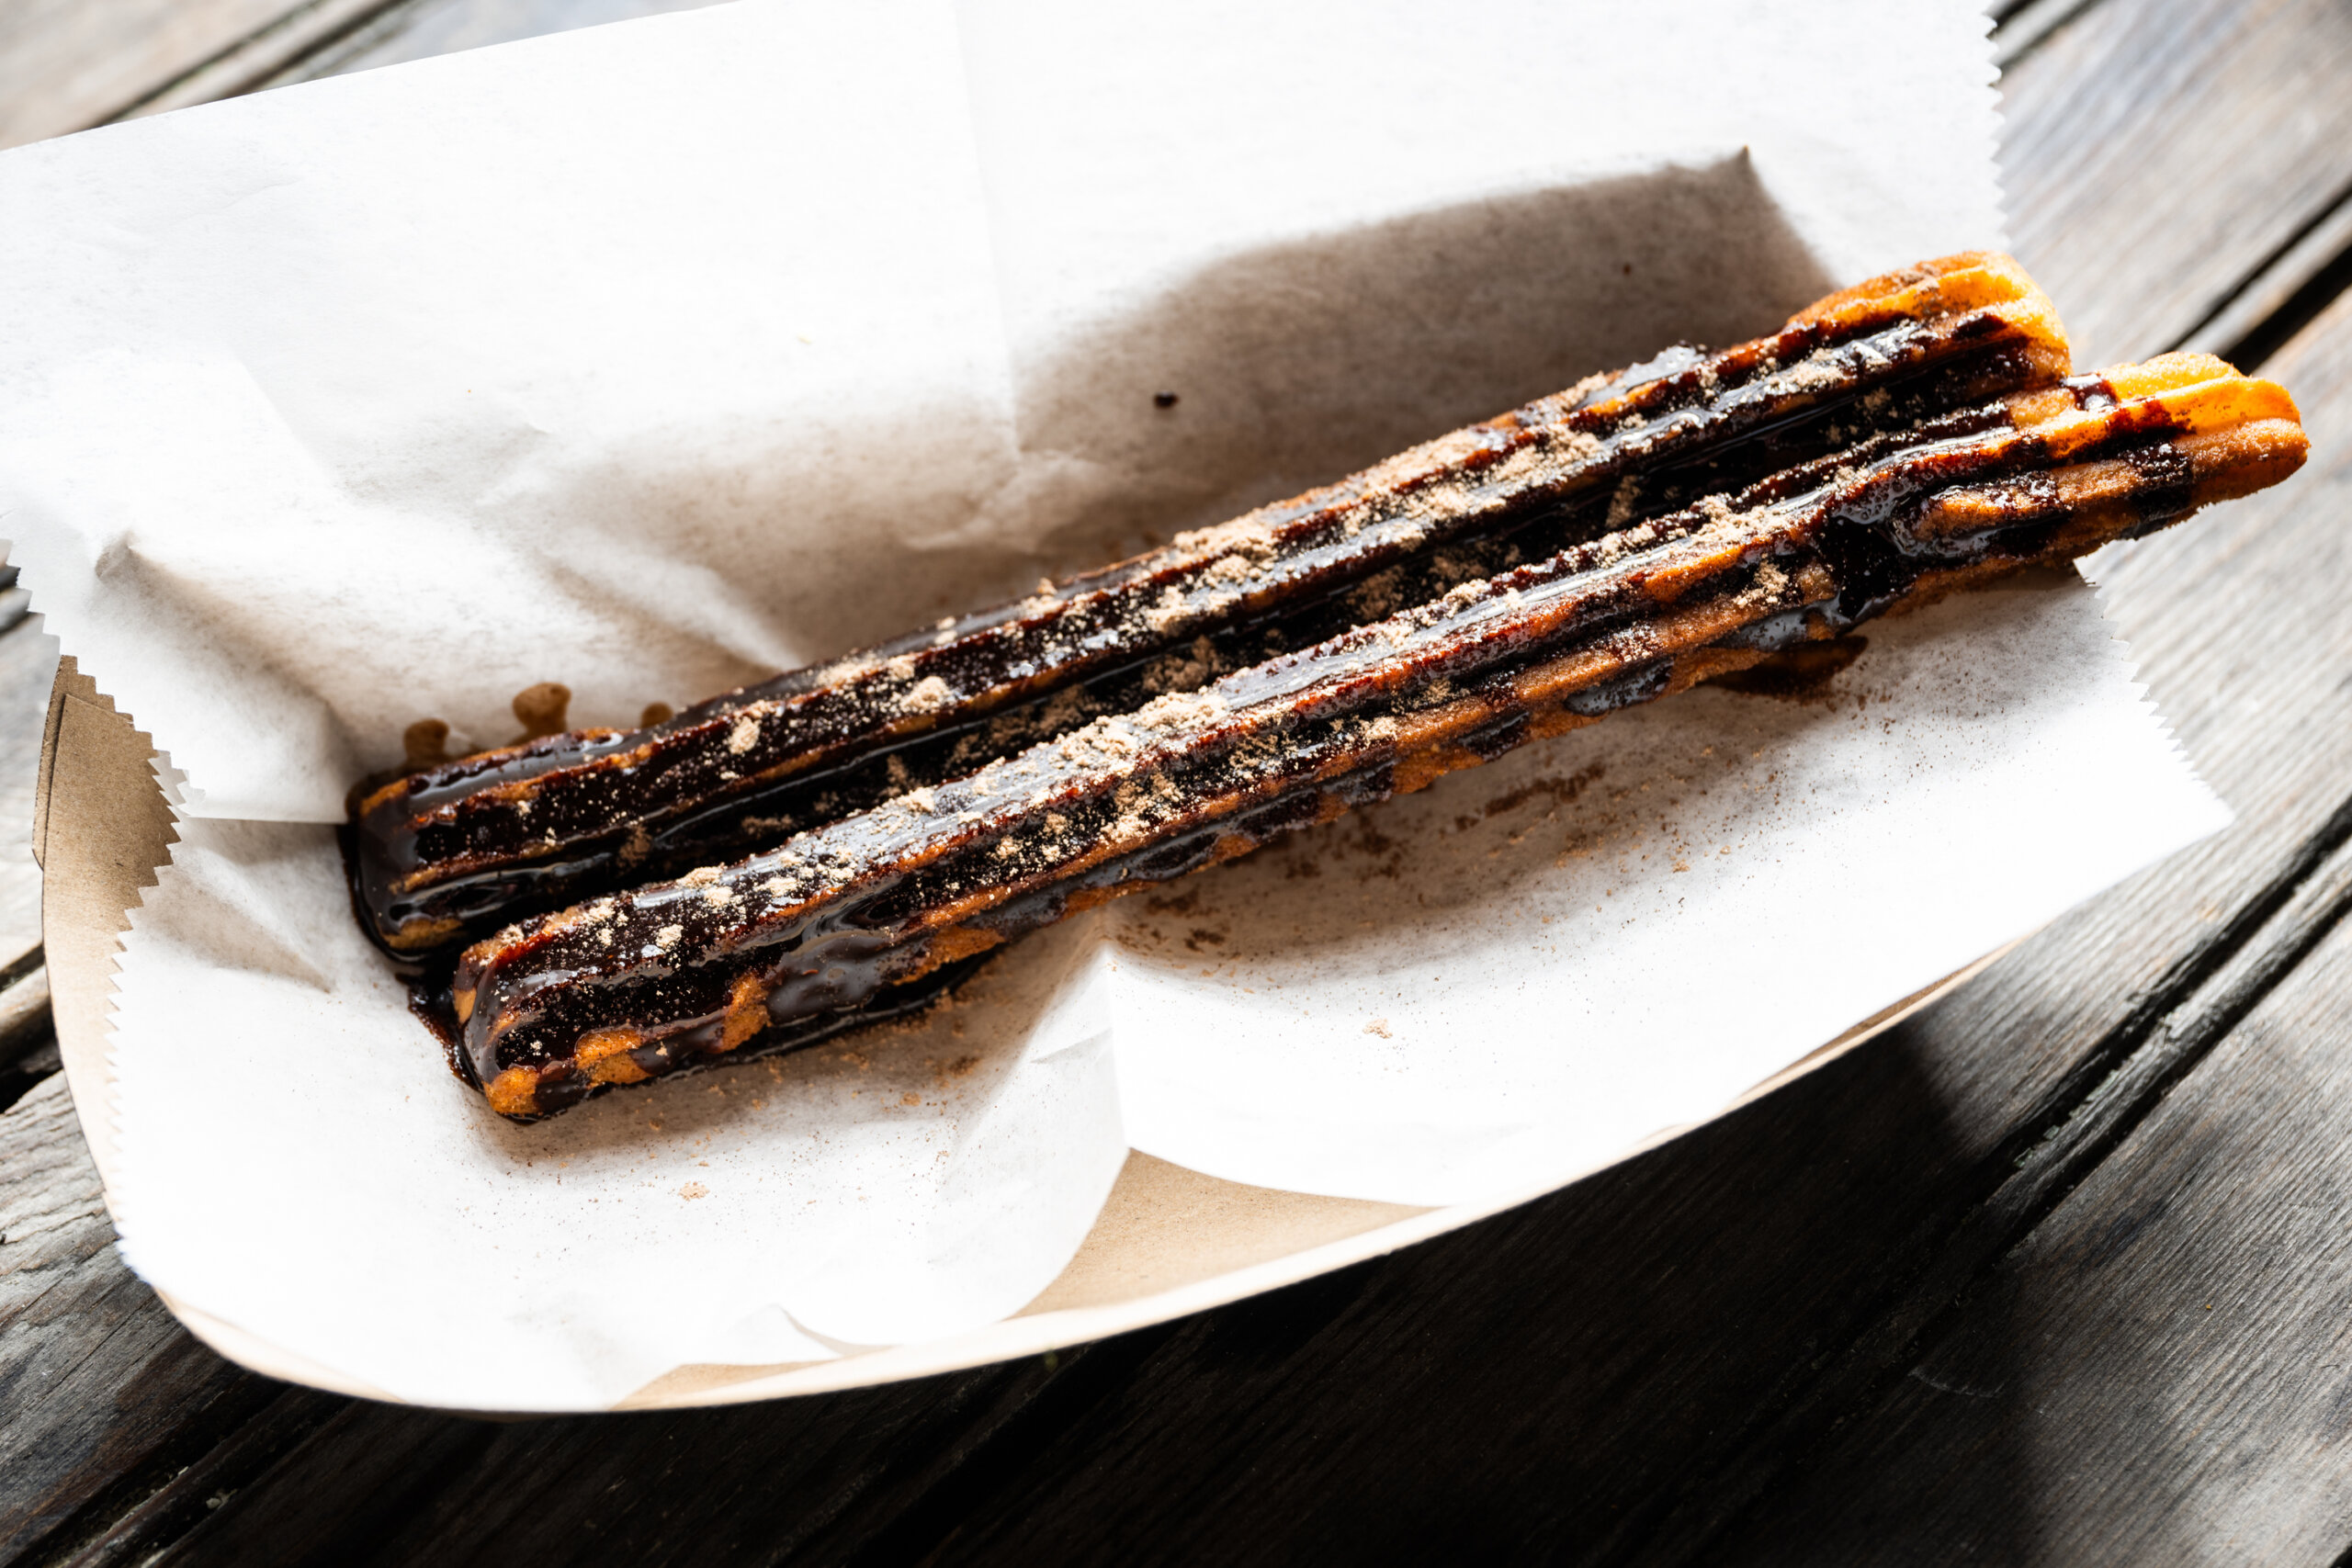 Spicy chocolate churros